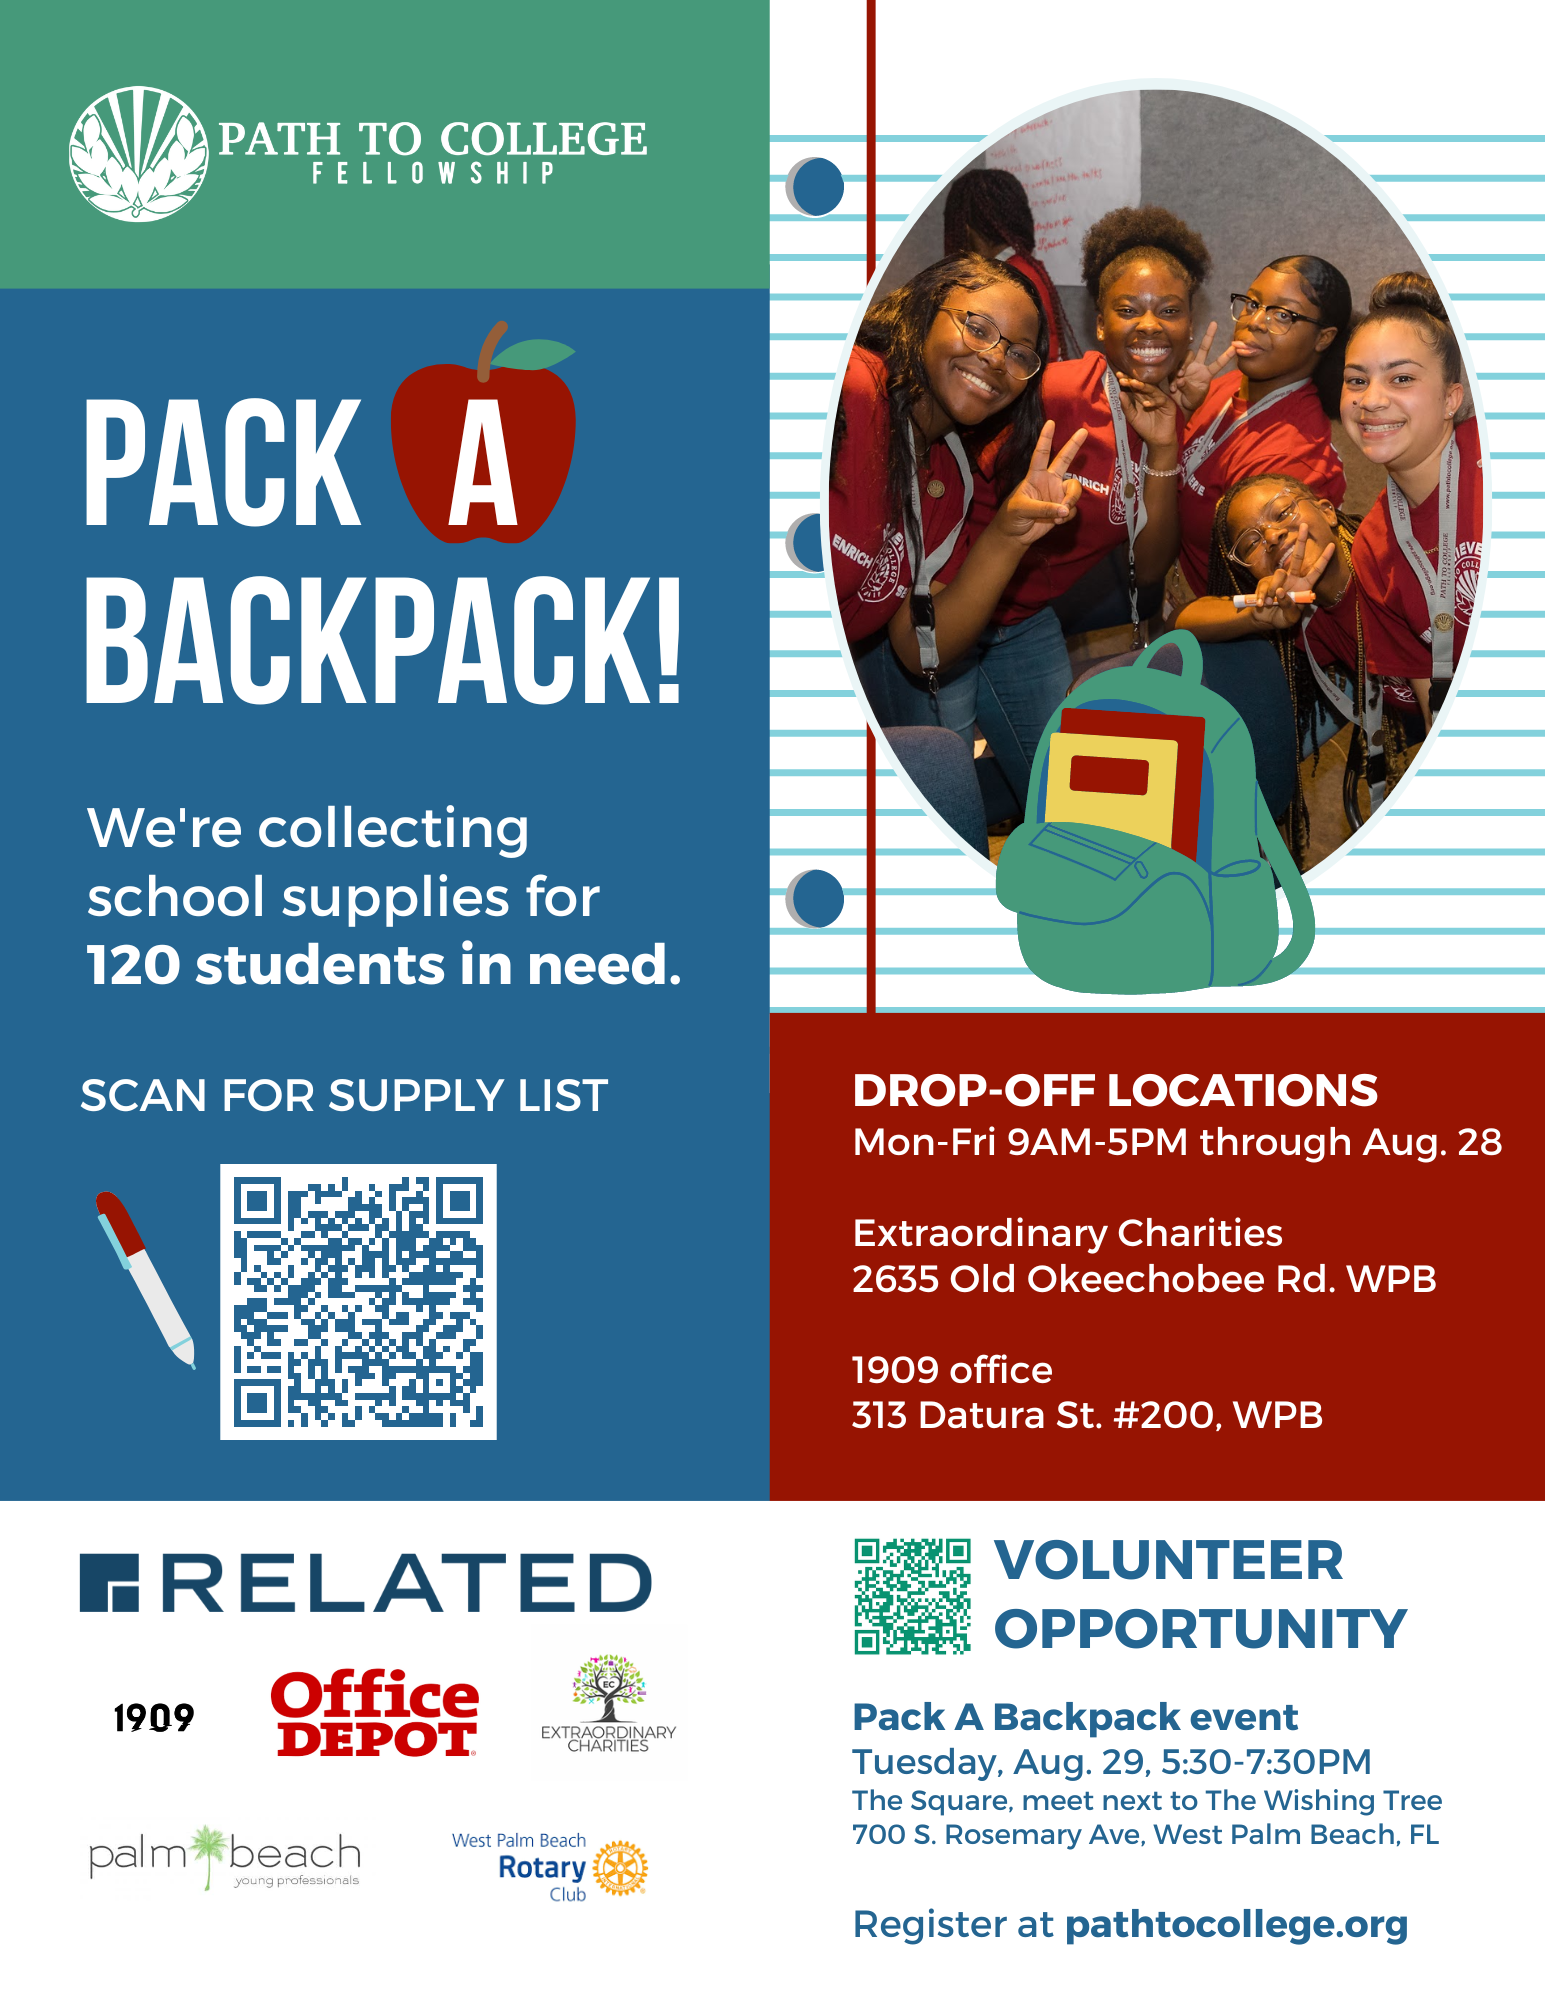 Pack a Backpack event flyer